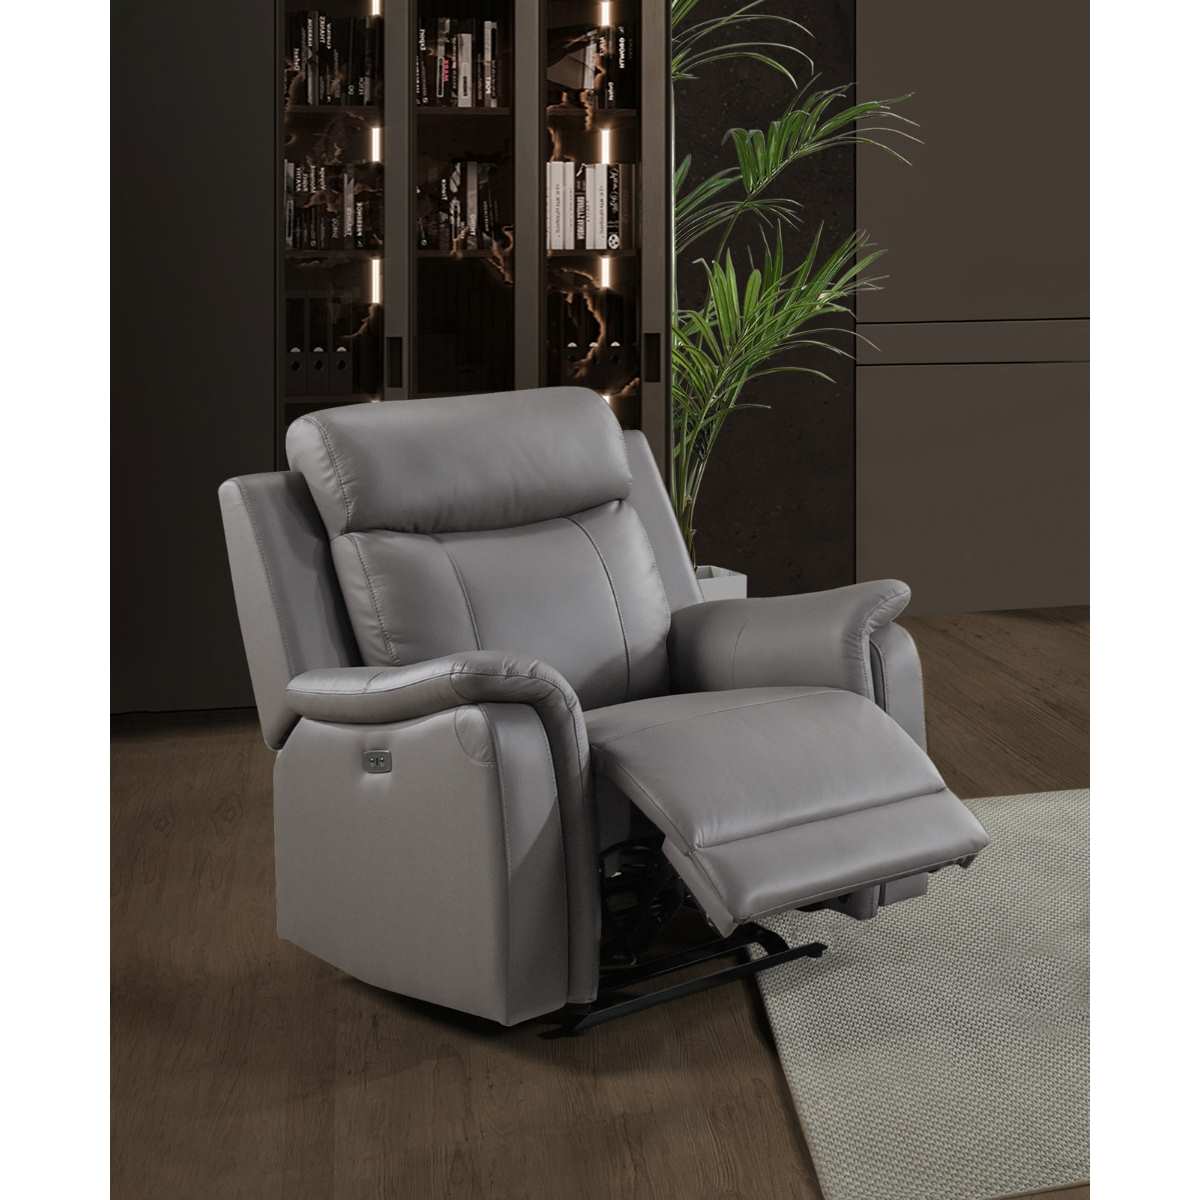 Cyrus Top Grain Leather Power Glider Recliner Chair Light Grey 99840